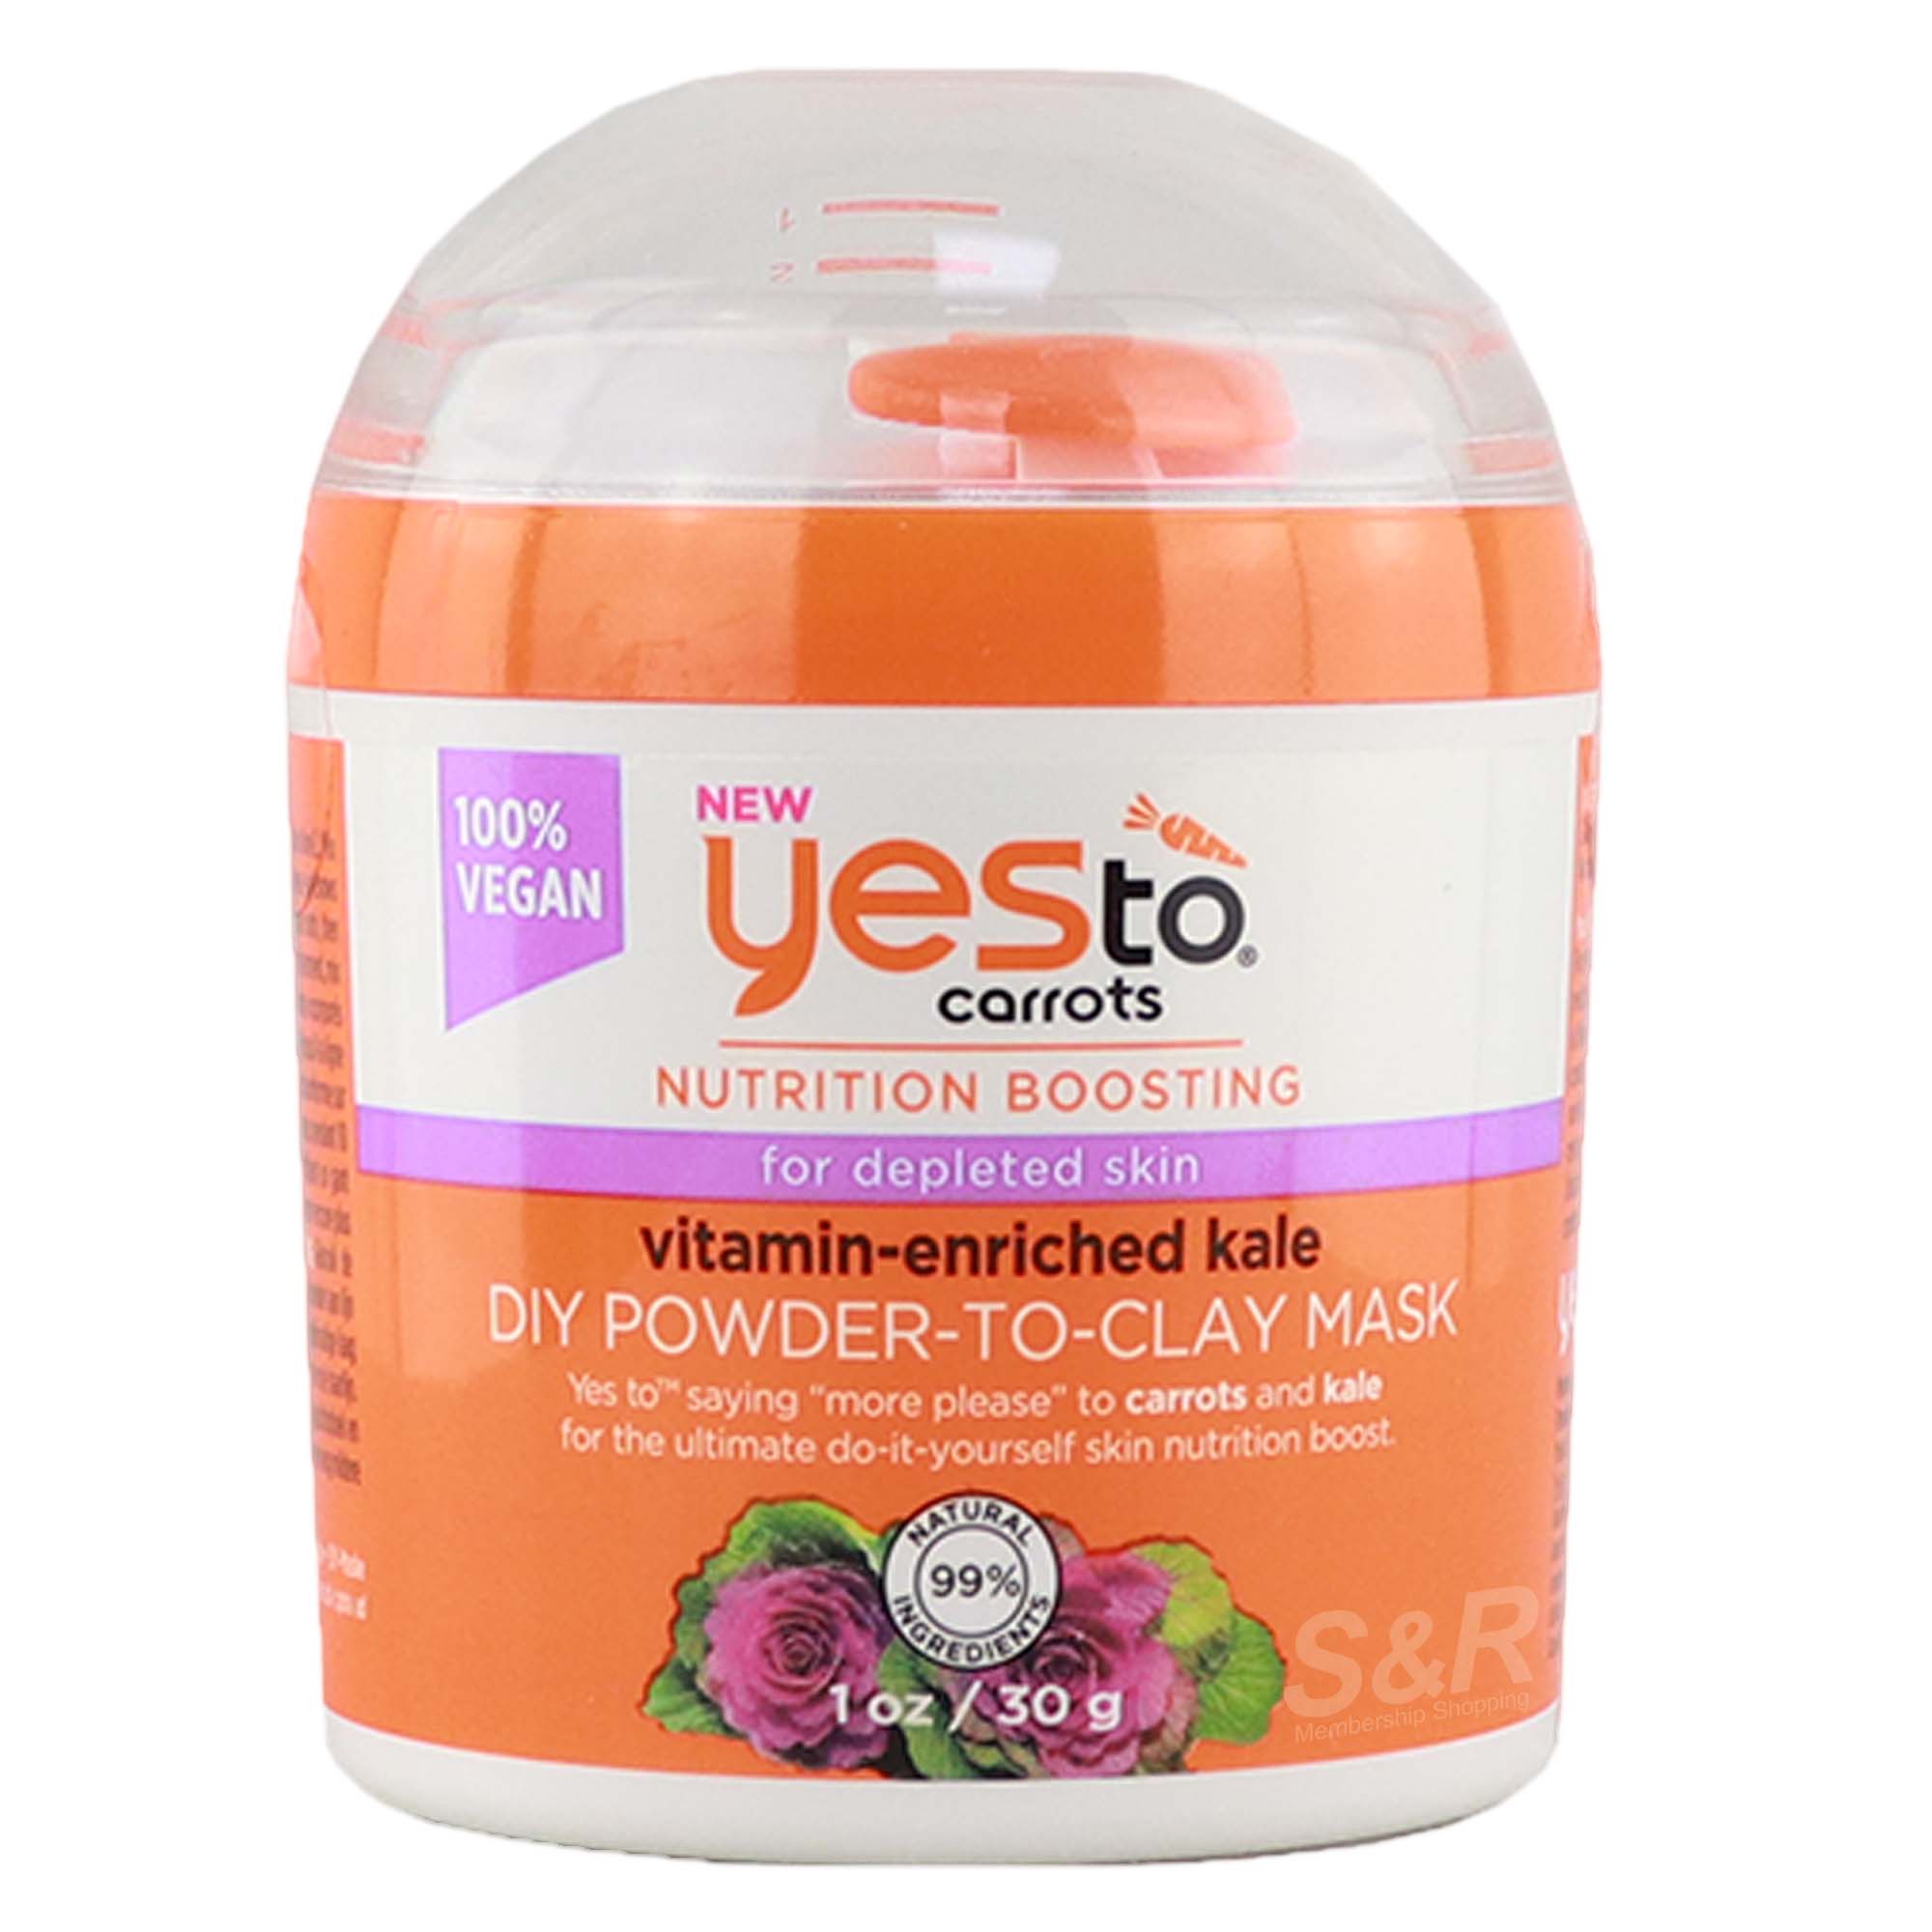 Yes To Carrots DIY Powder-to-Clay Mask Vitamin-Enriched Kale 30g